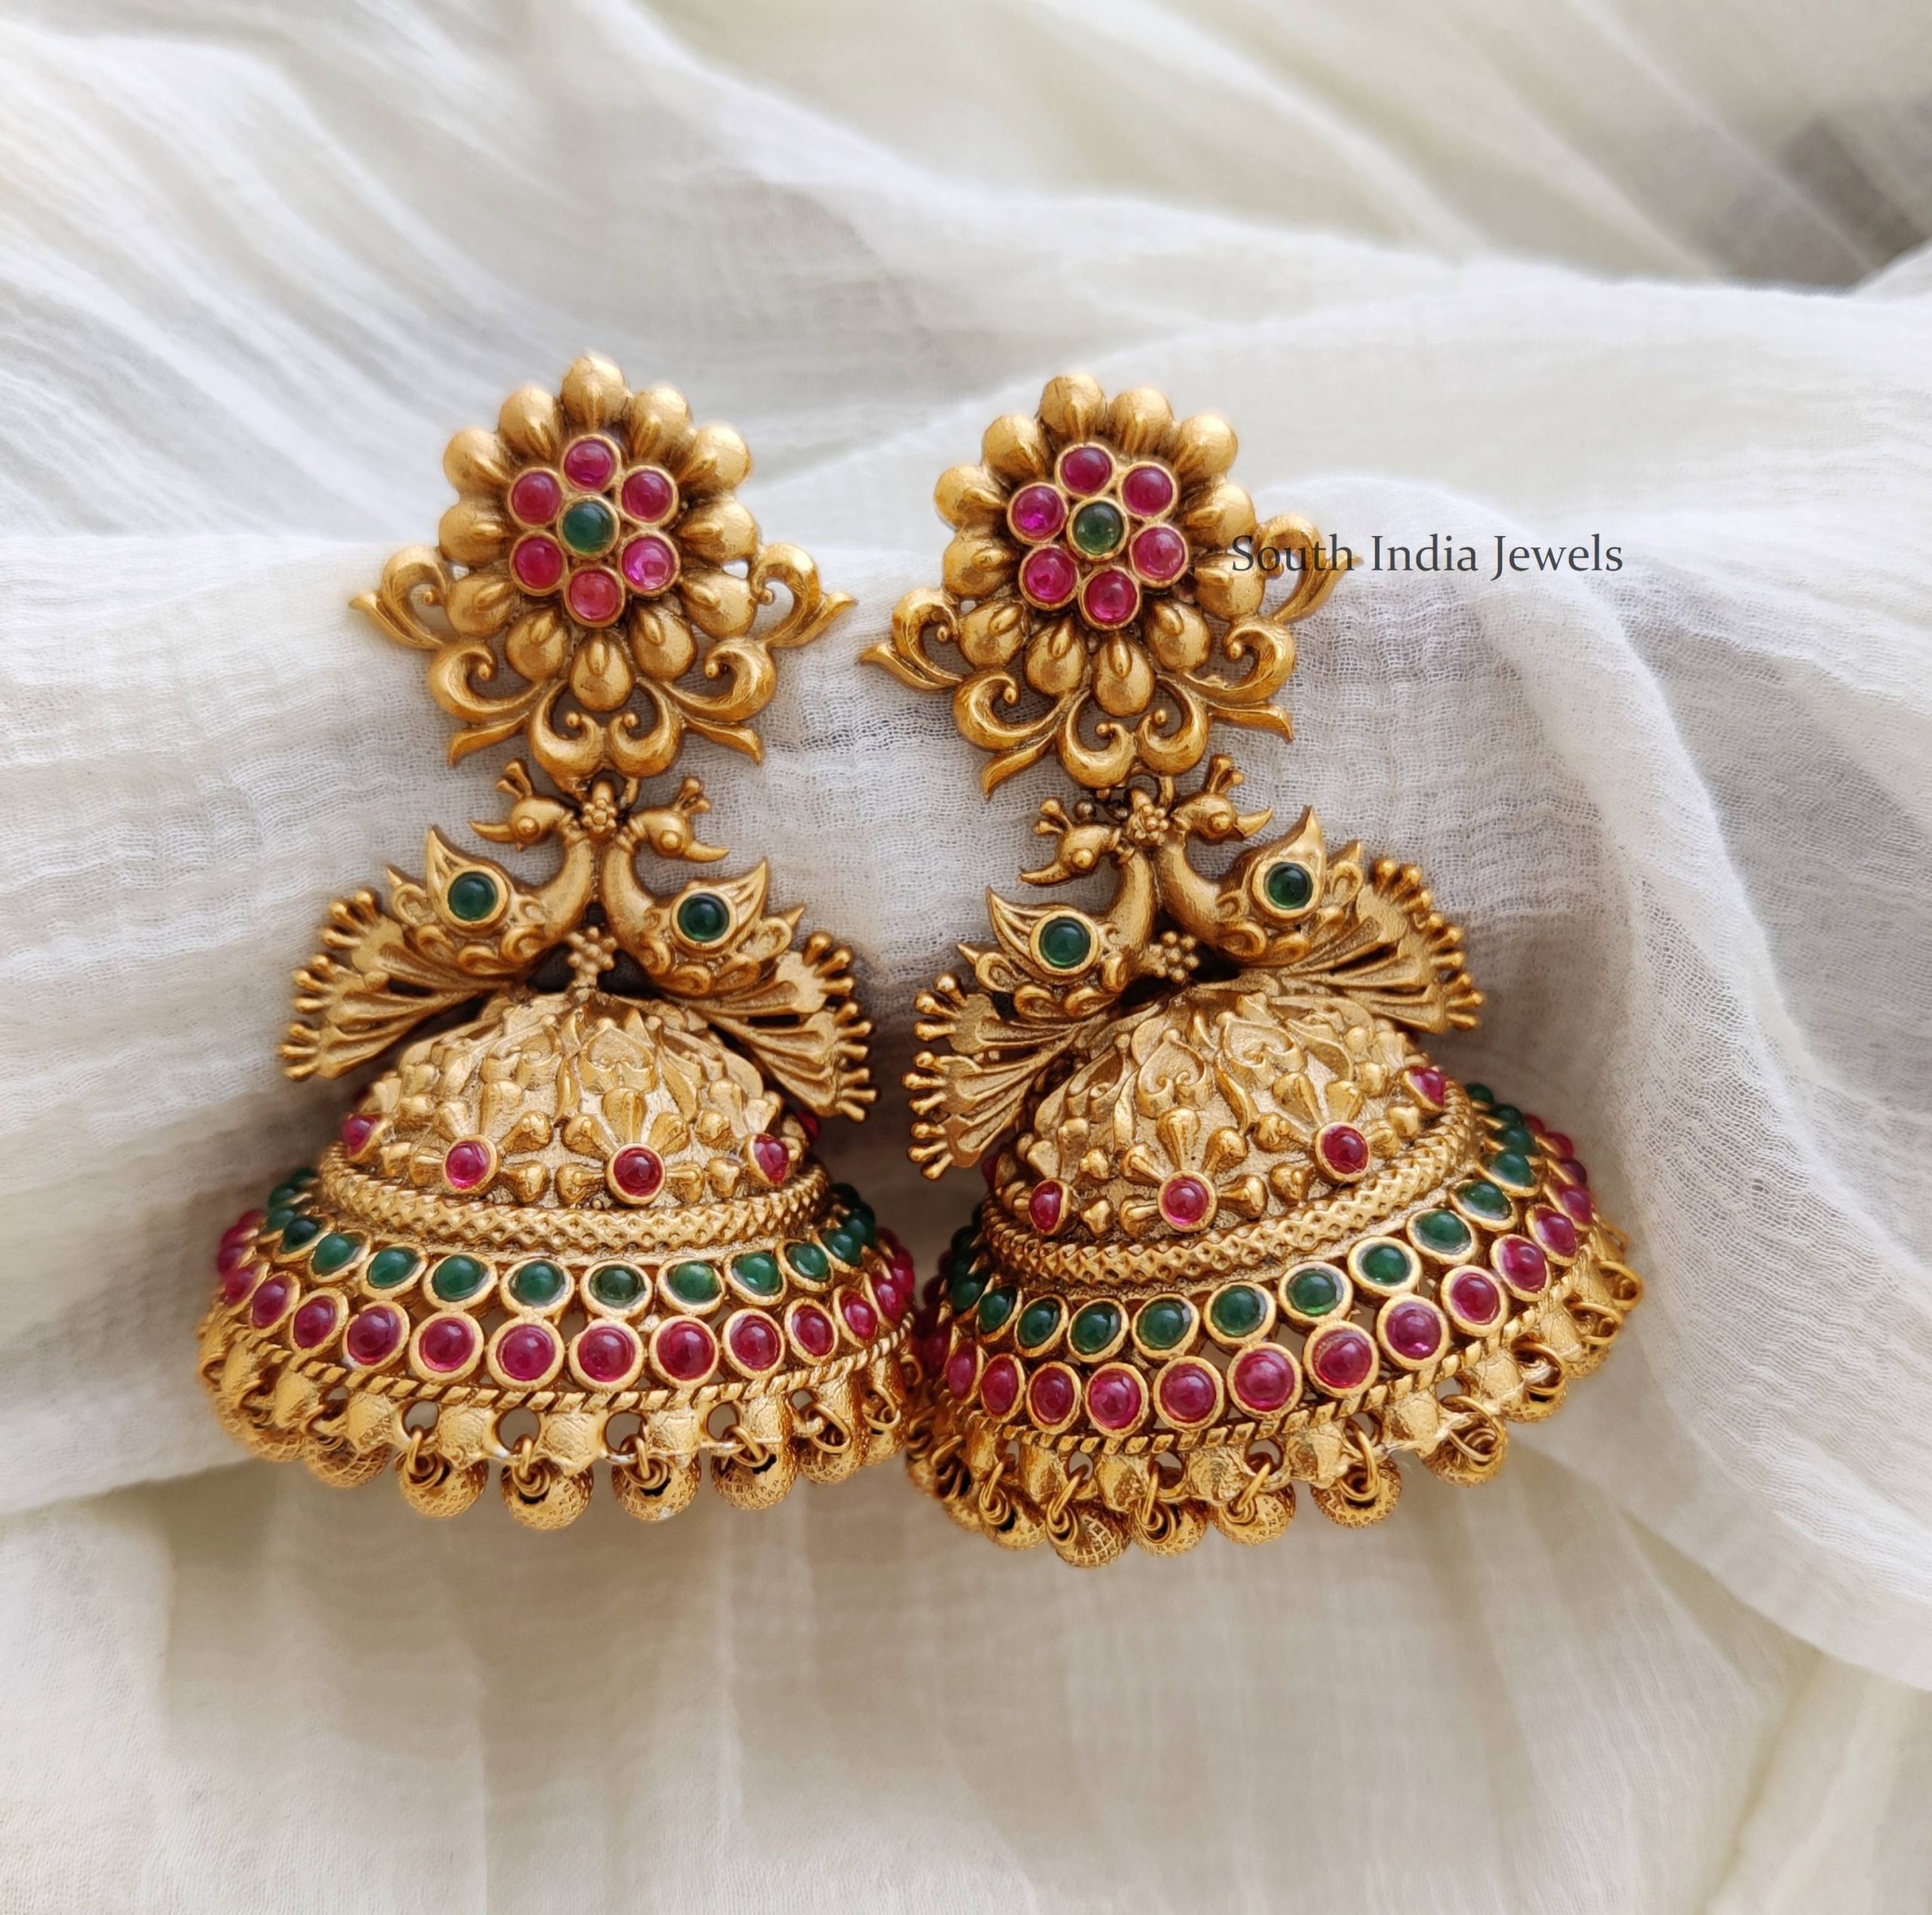 Traditional Peacock Design Jhumkas - South India Jewels